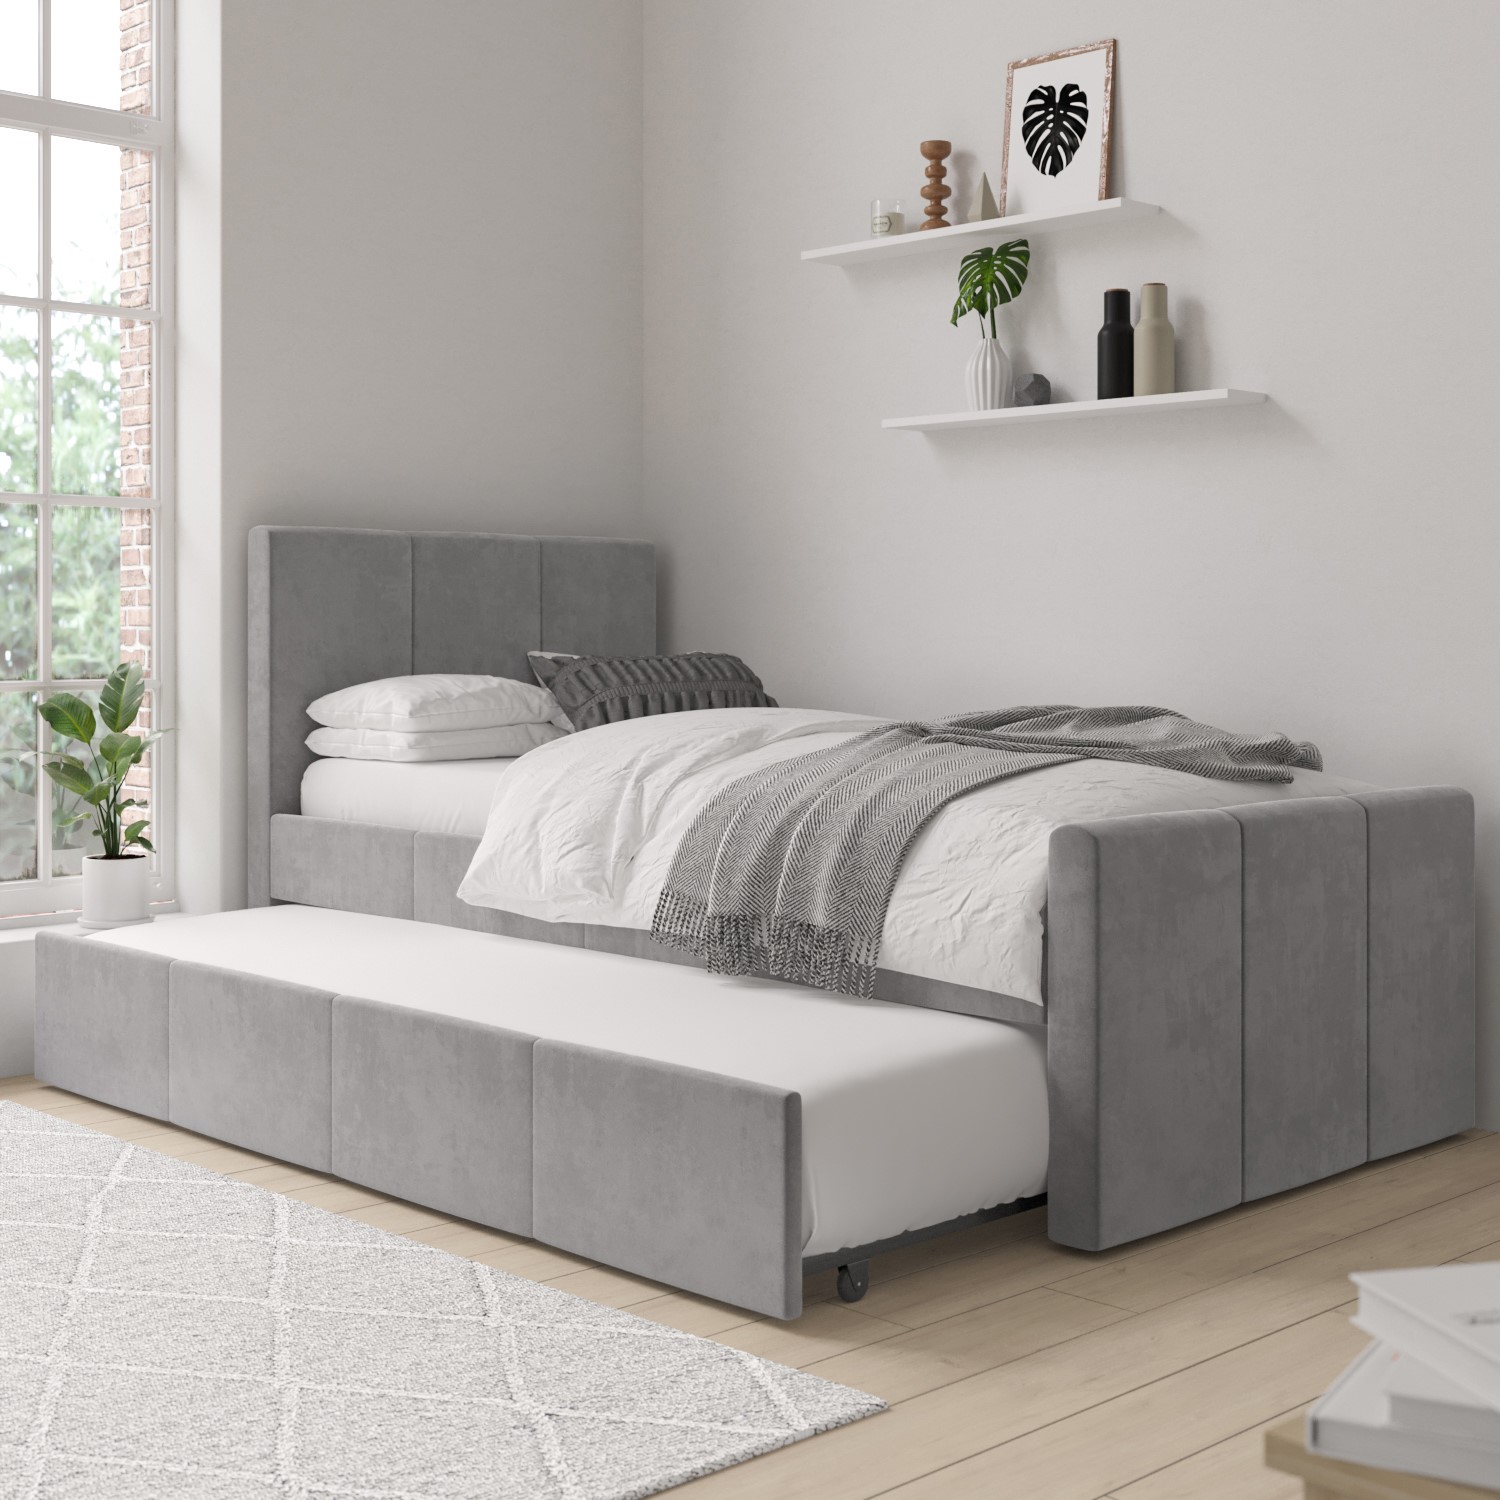 Grey Velvet Single Guest Bed with Trundle - Layla LAY001 5056096020557.0